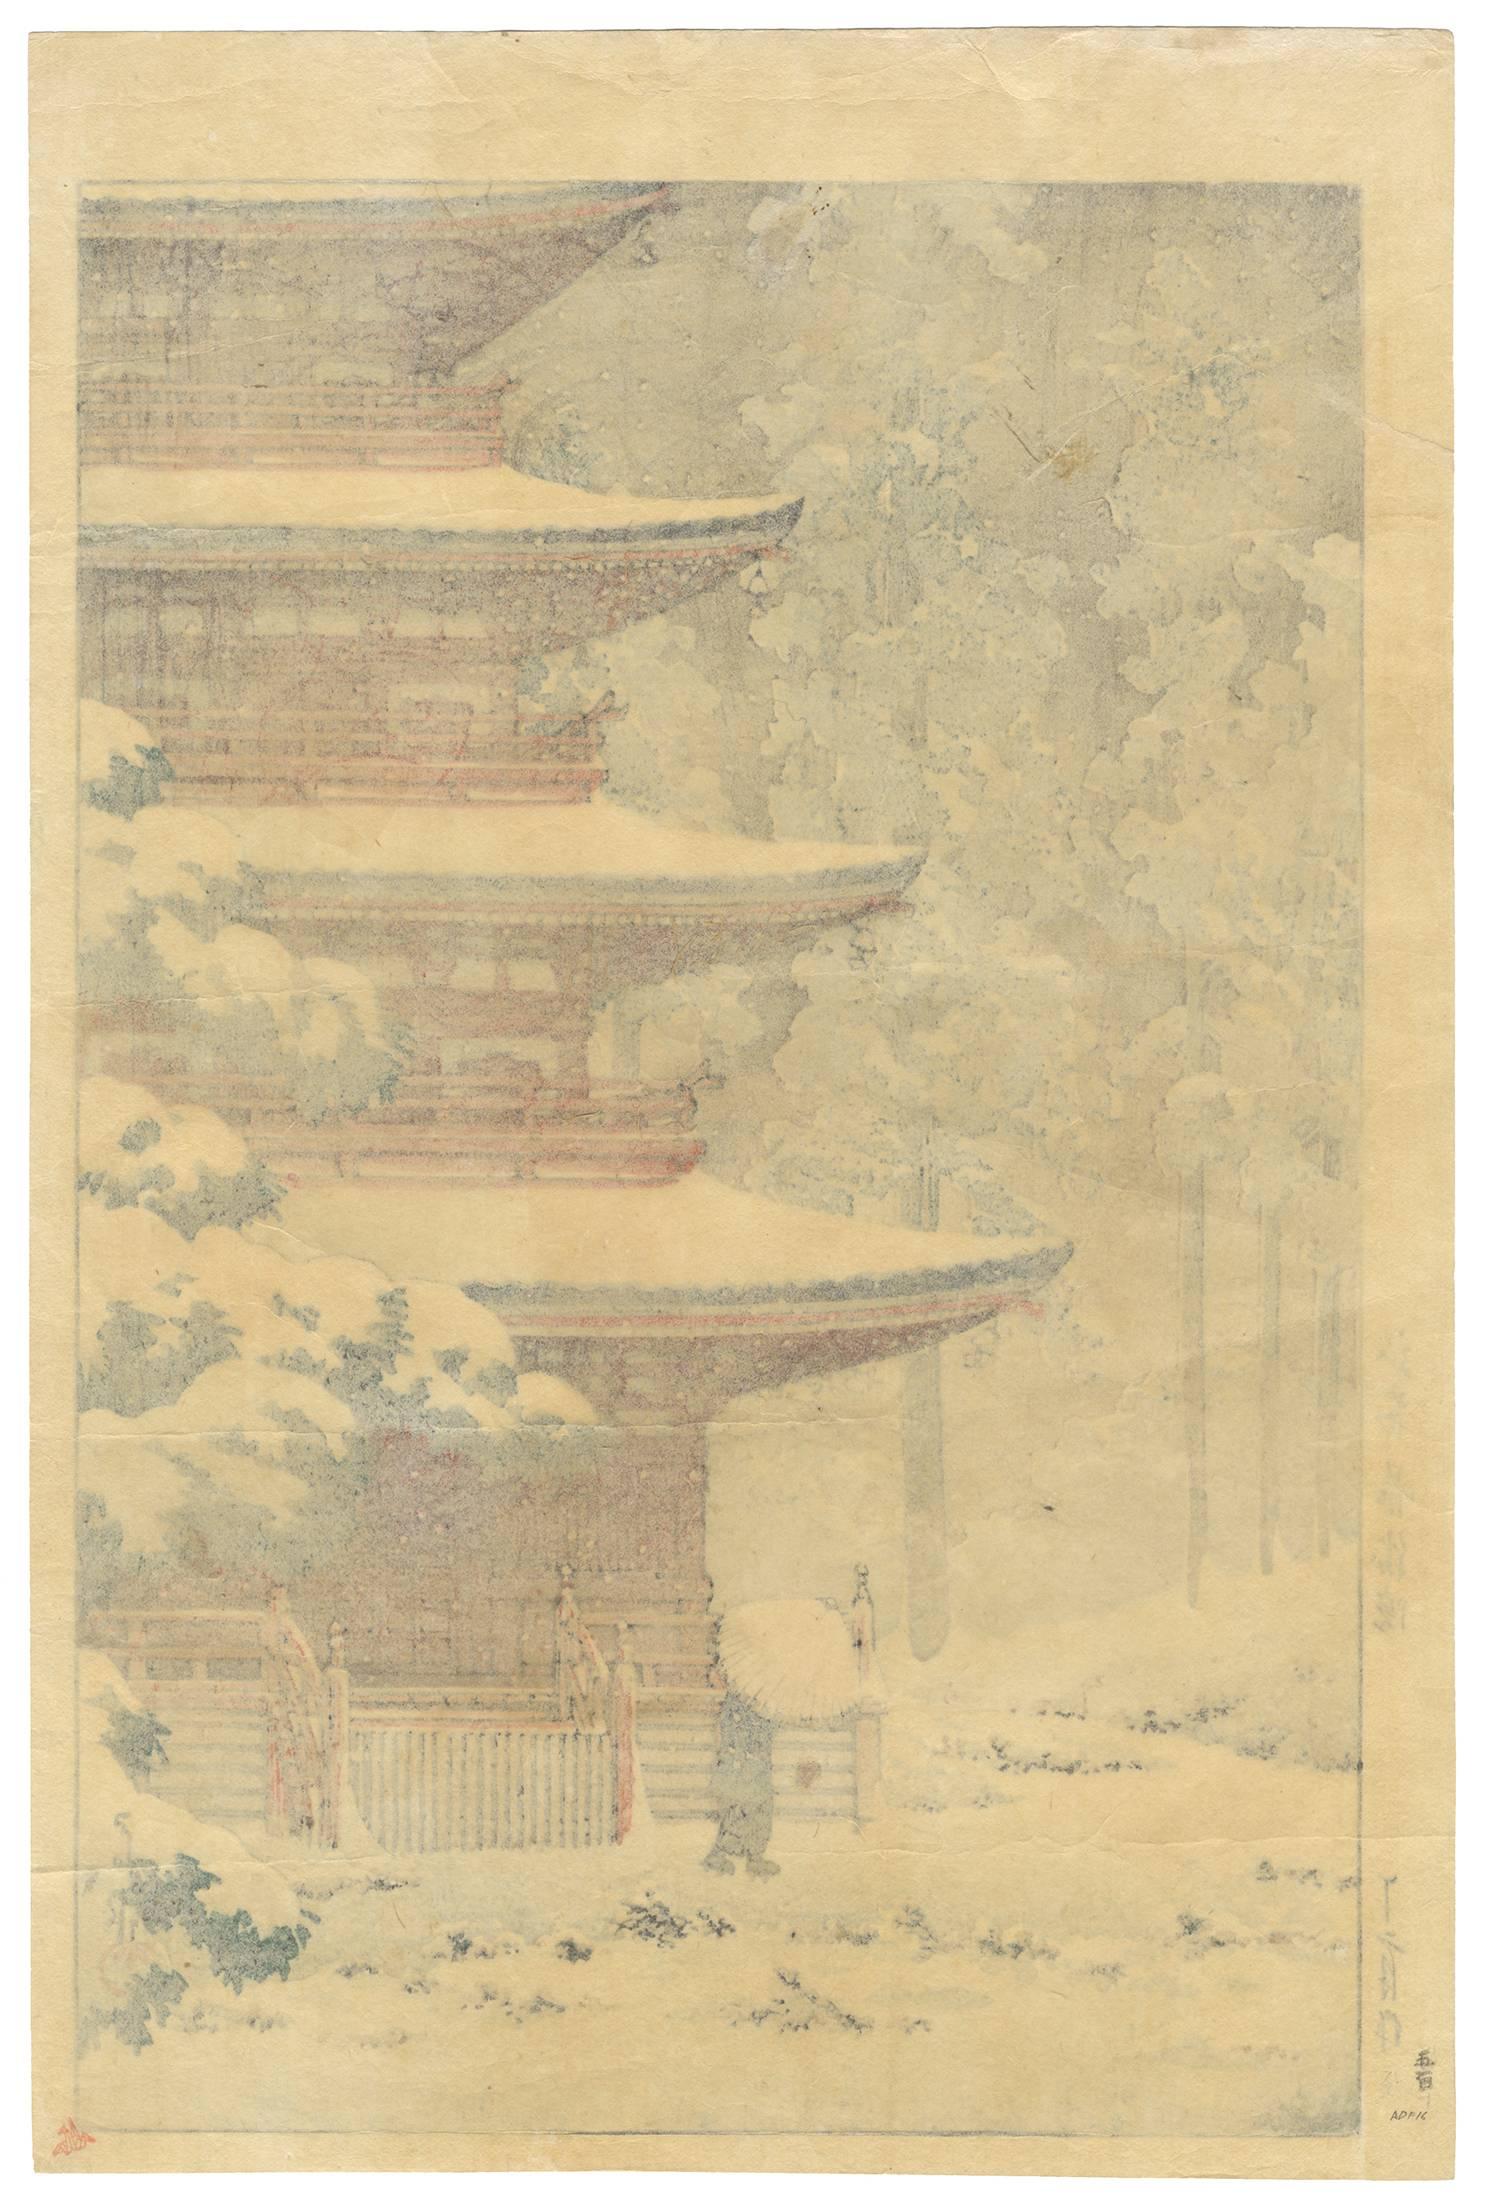 Early Showa period (early 20th century).

Hand-printed on Japanese washi paper.

This print shows the Saishoin Bhuddist temple in Hirosaki, Aomori prefecture. 
The scenery is covered in snow and a figure is shown to be walking in front of the